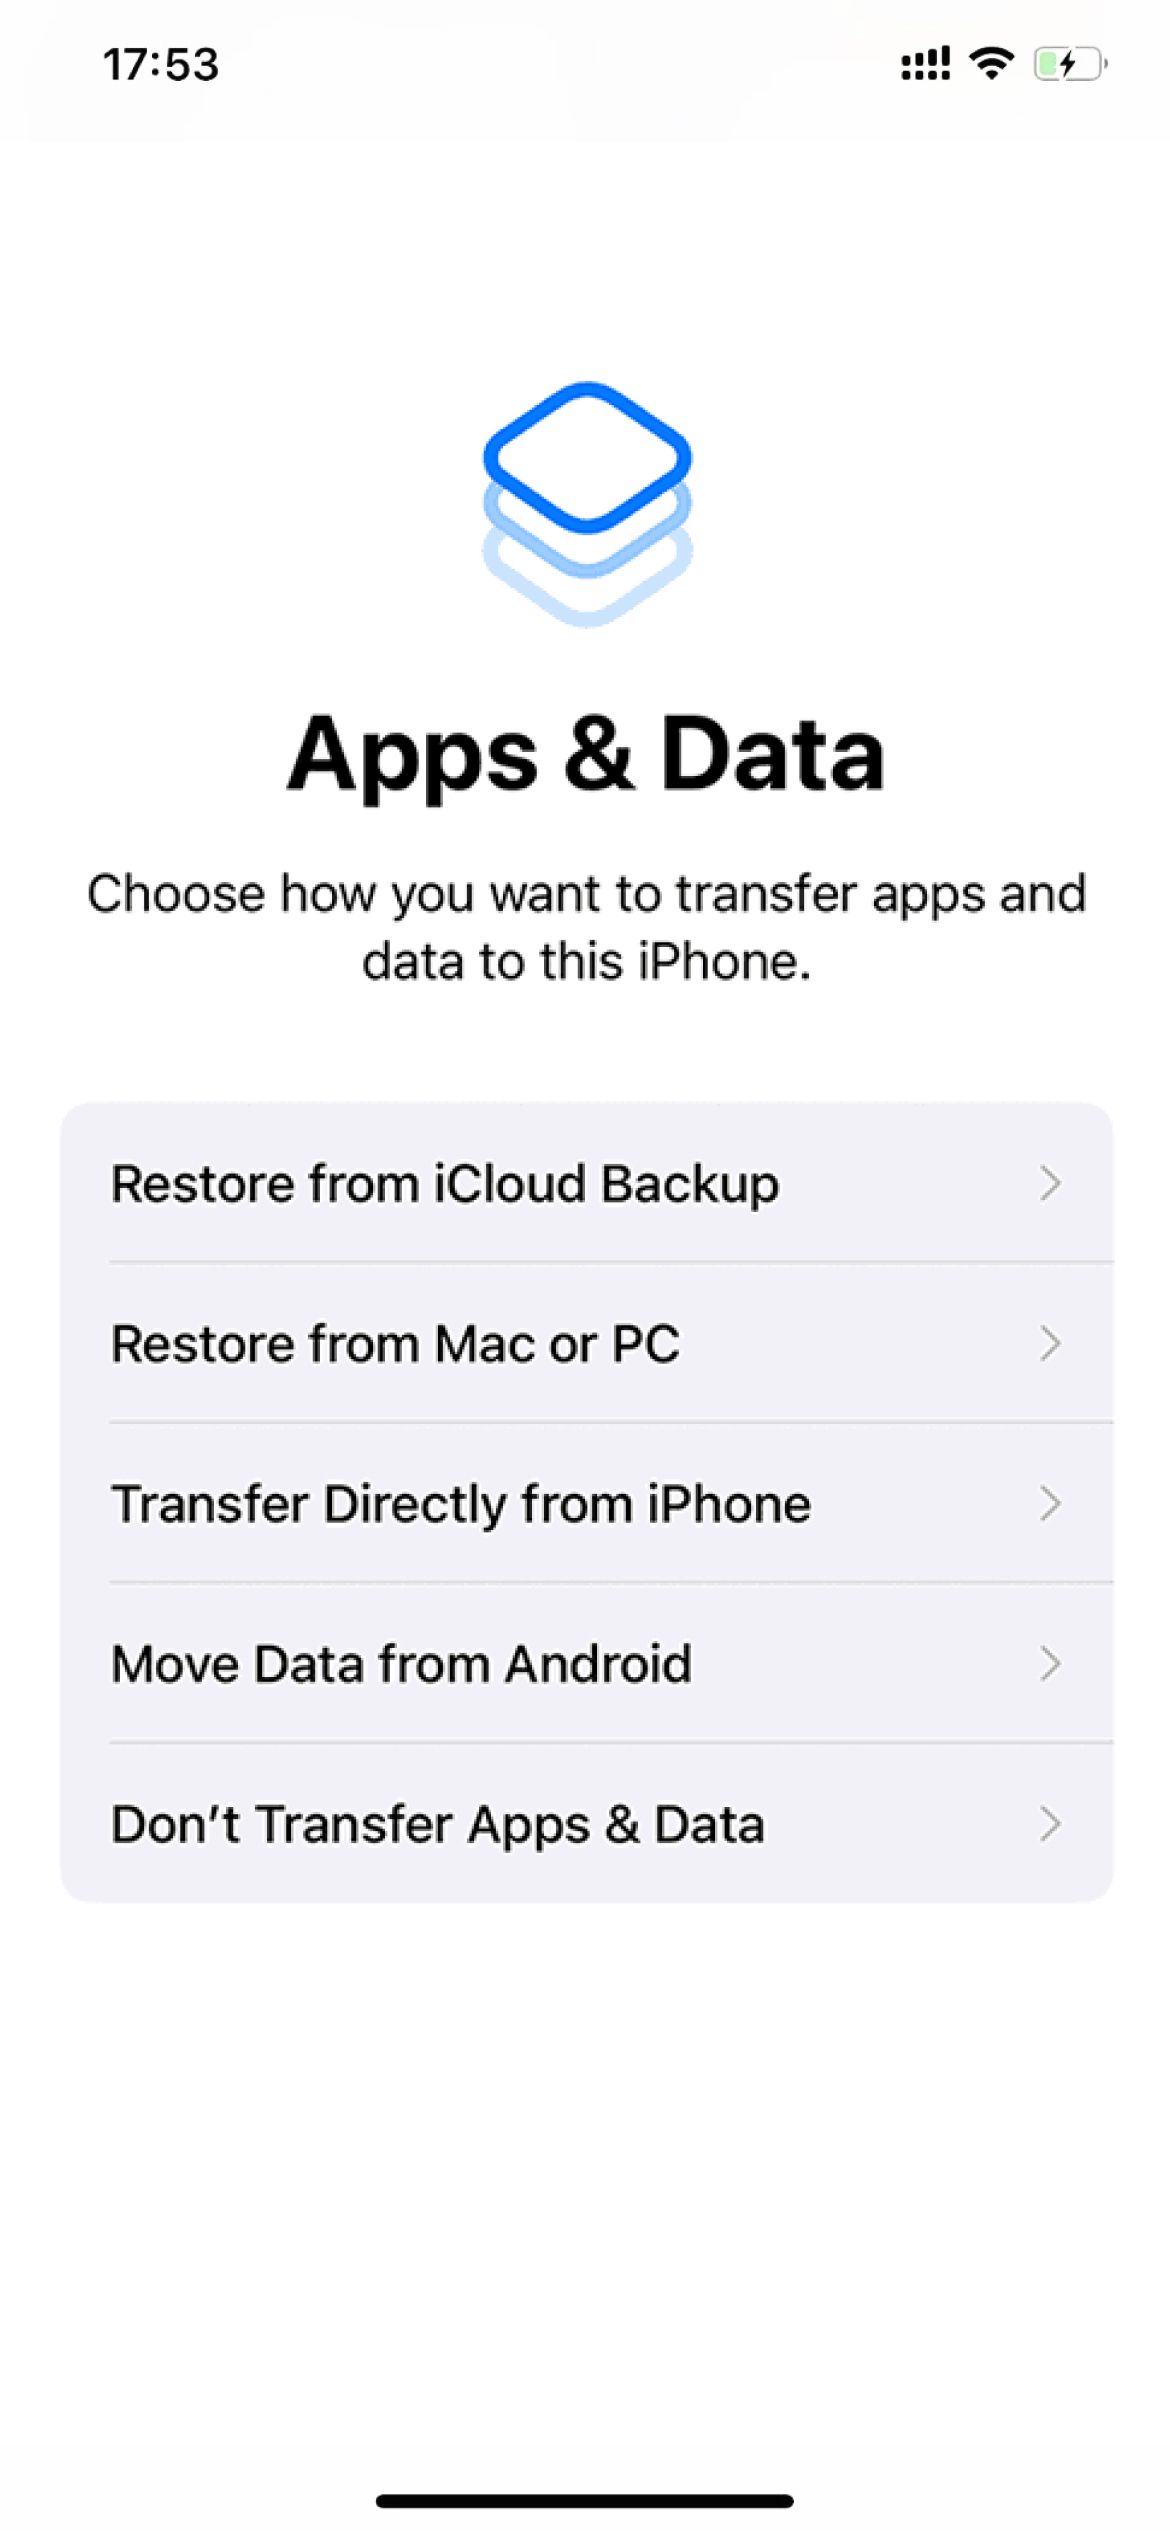 Select Restore from iCloud Backup option in the Apps & Data page on iPhone setup